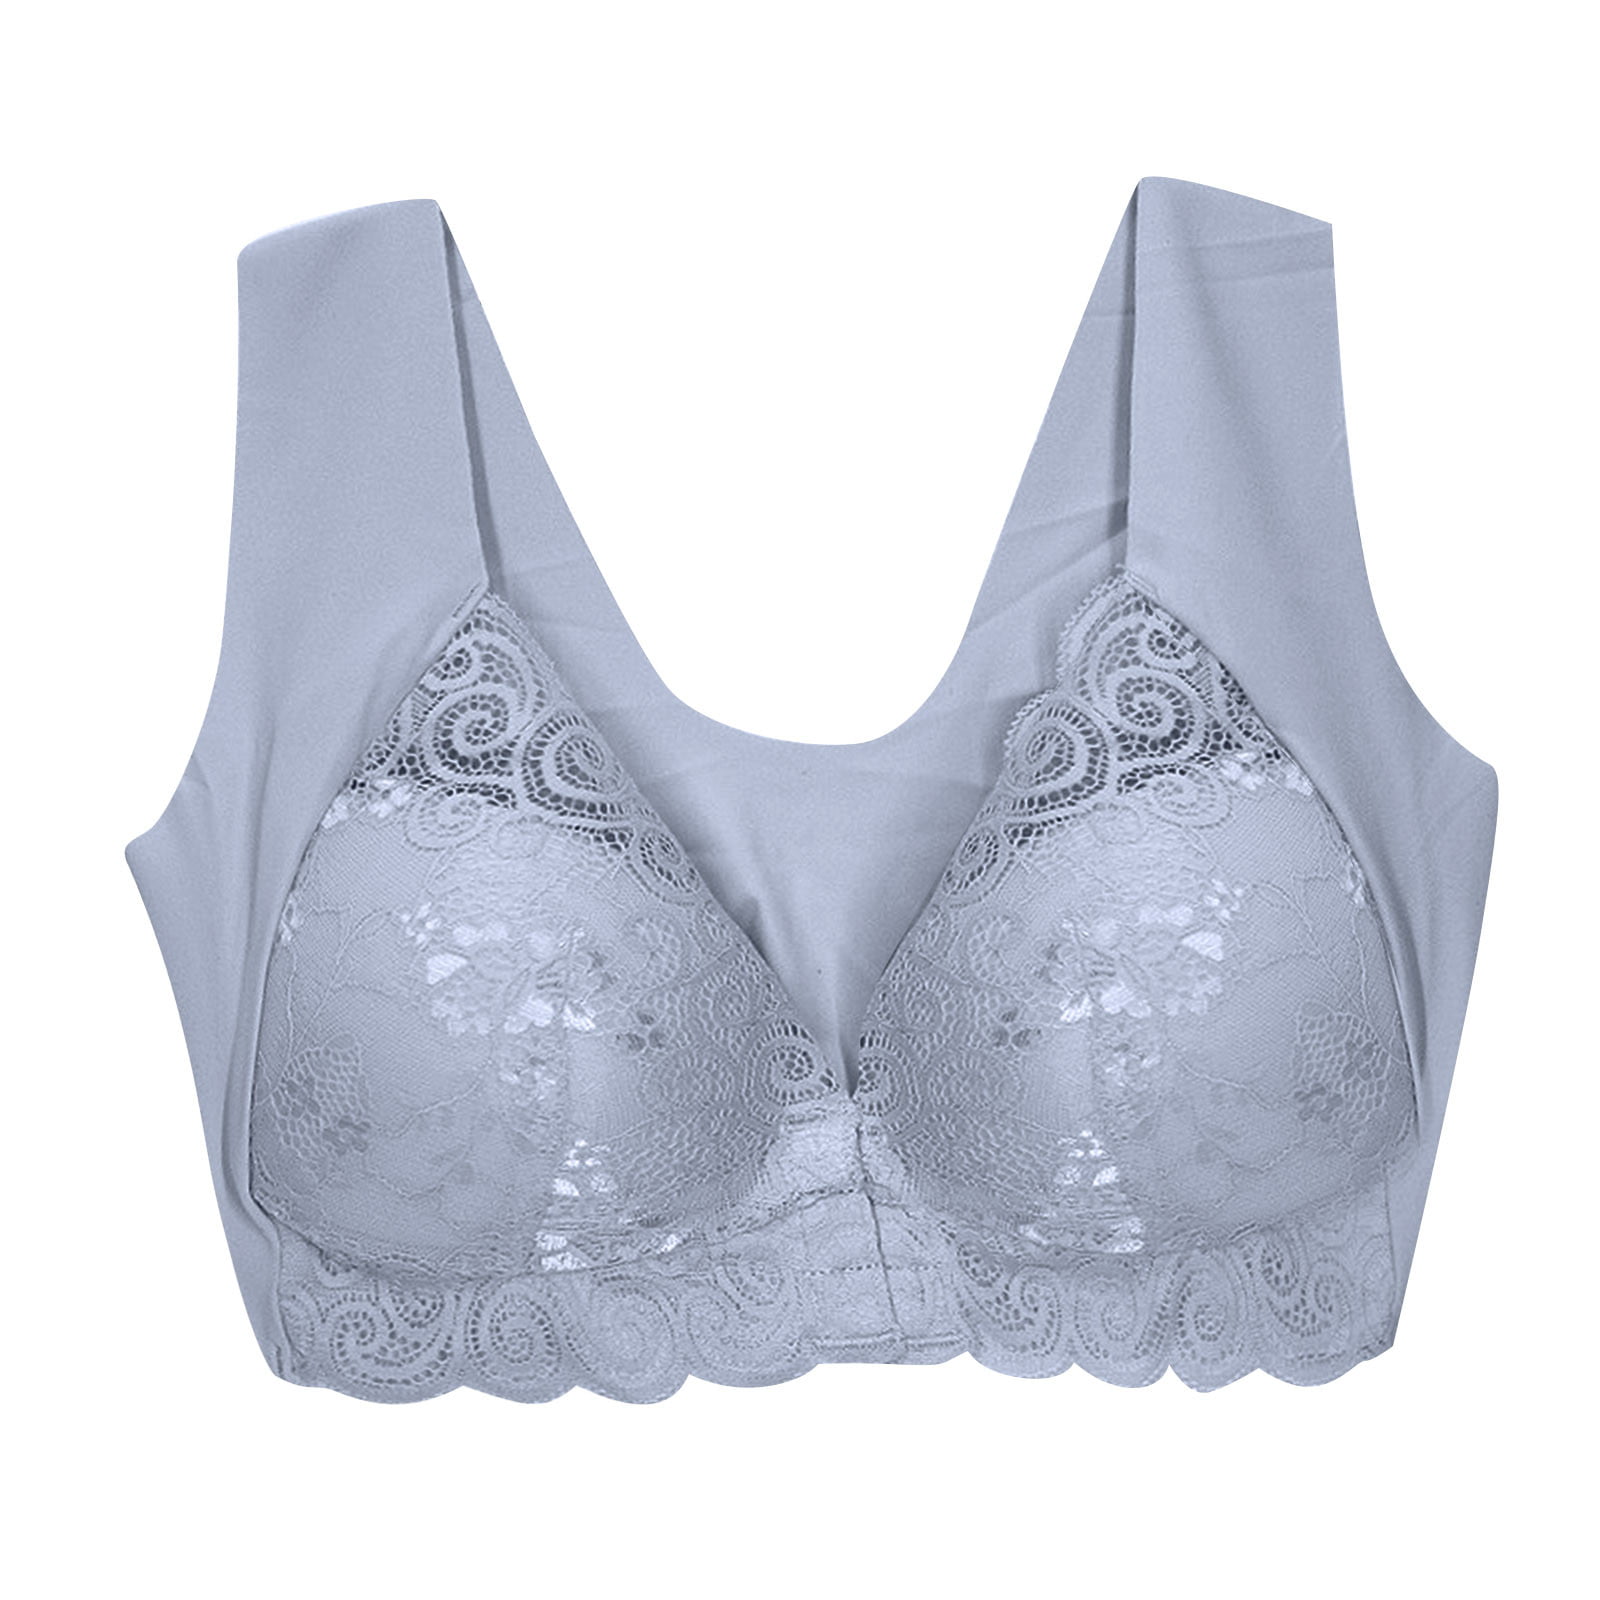 Lace Thin Front Closure Wireless Bra, Breathable Lace Trim Seamed Racerback  Bra, Women's Lingerie And Underwear for Sale Australia, New Collection  Online